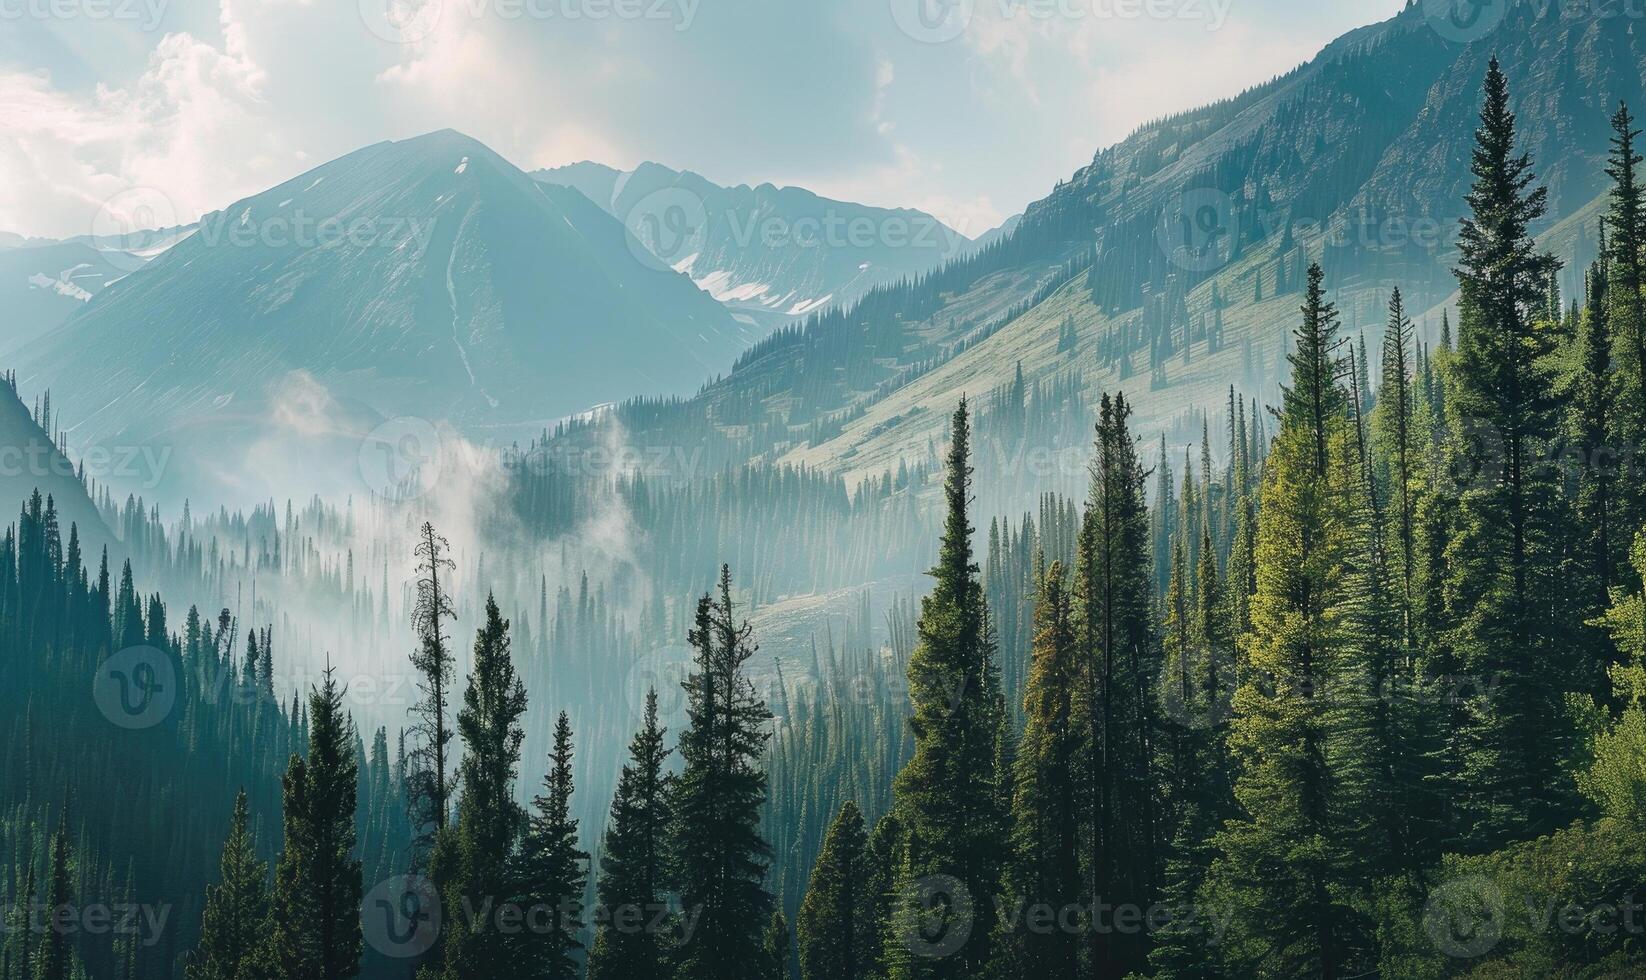 A picturesque mountain landscape with towering pine trees lining the rugged slopes photo